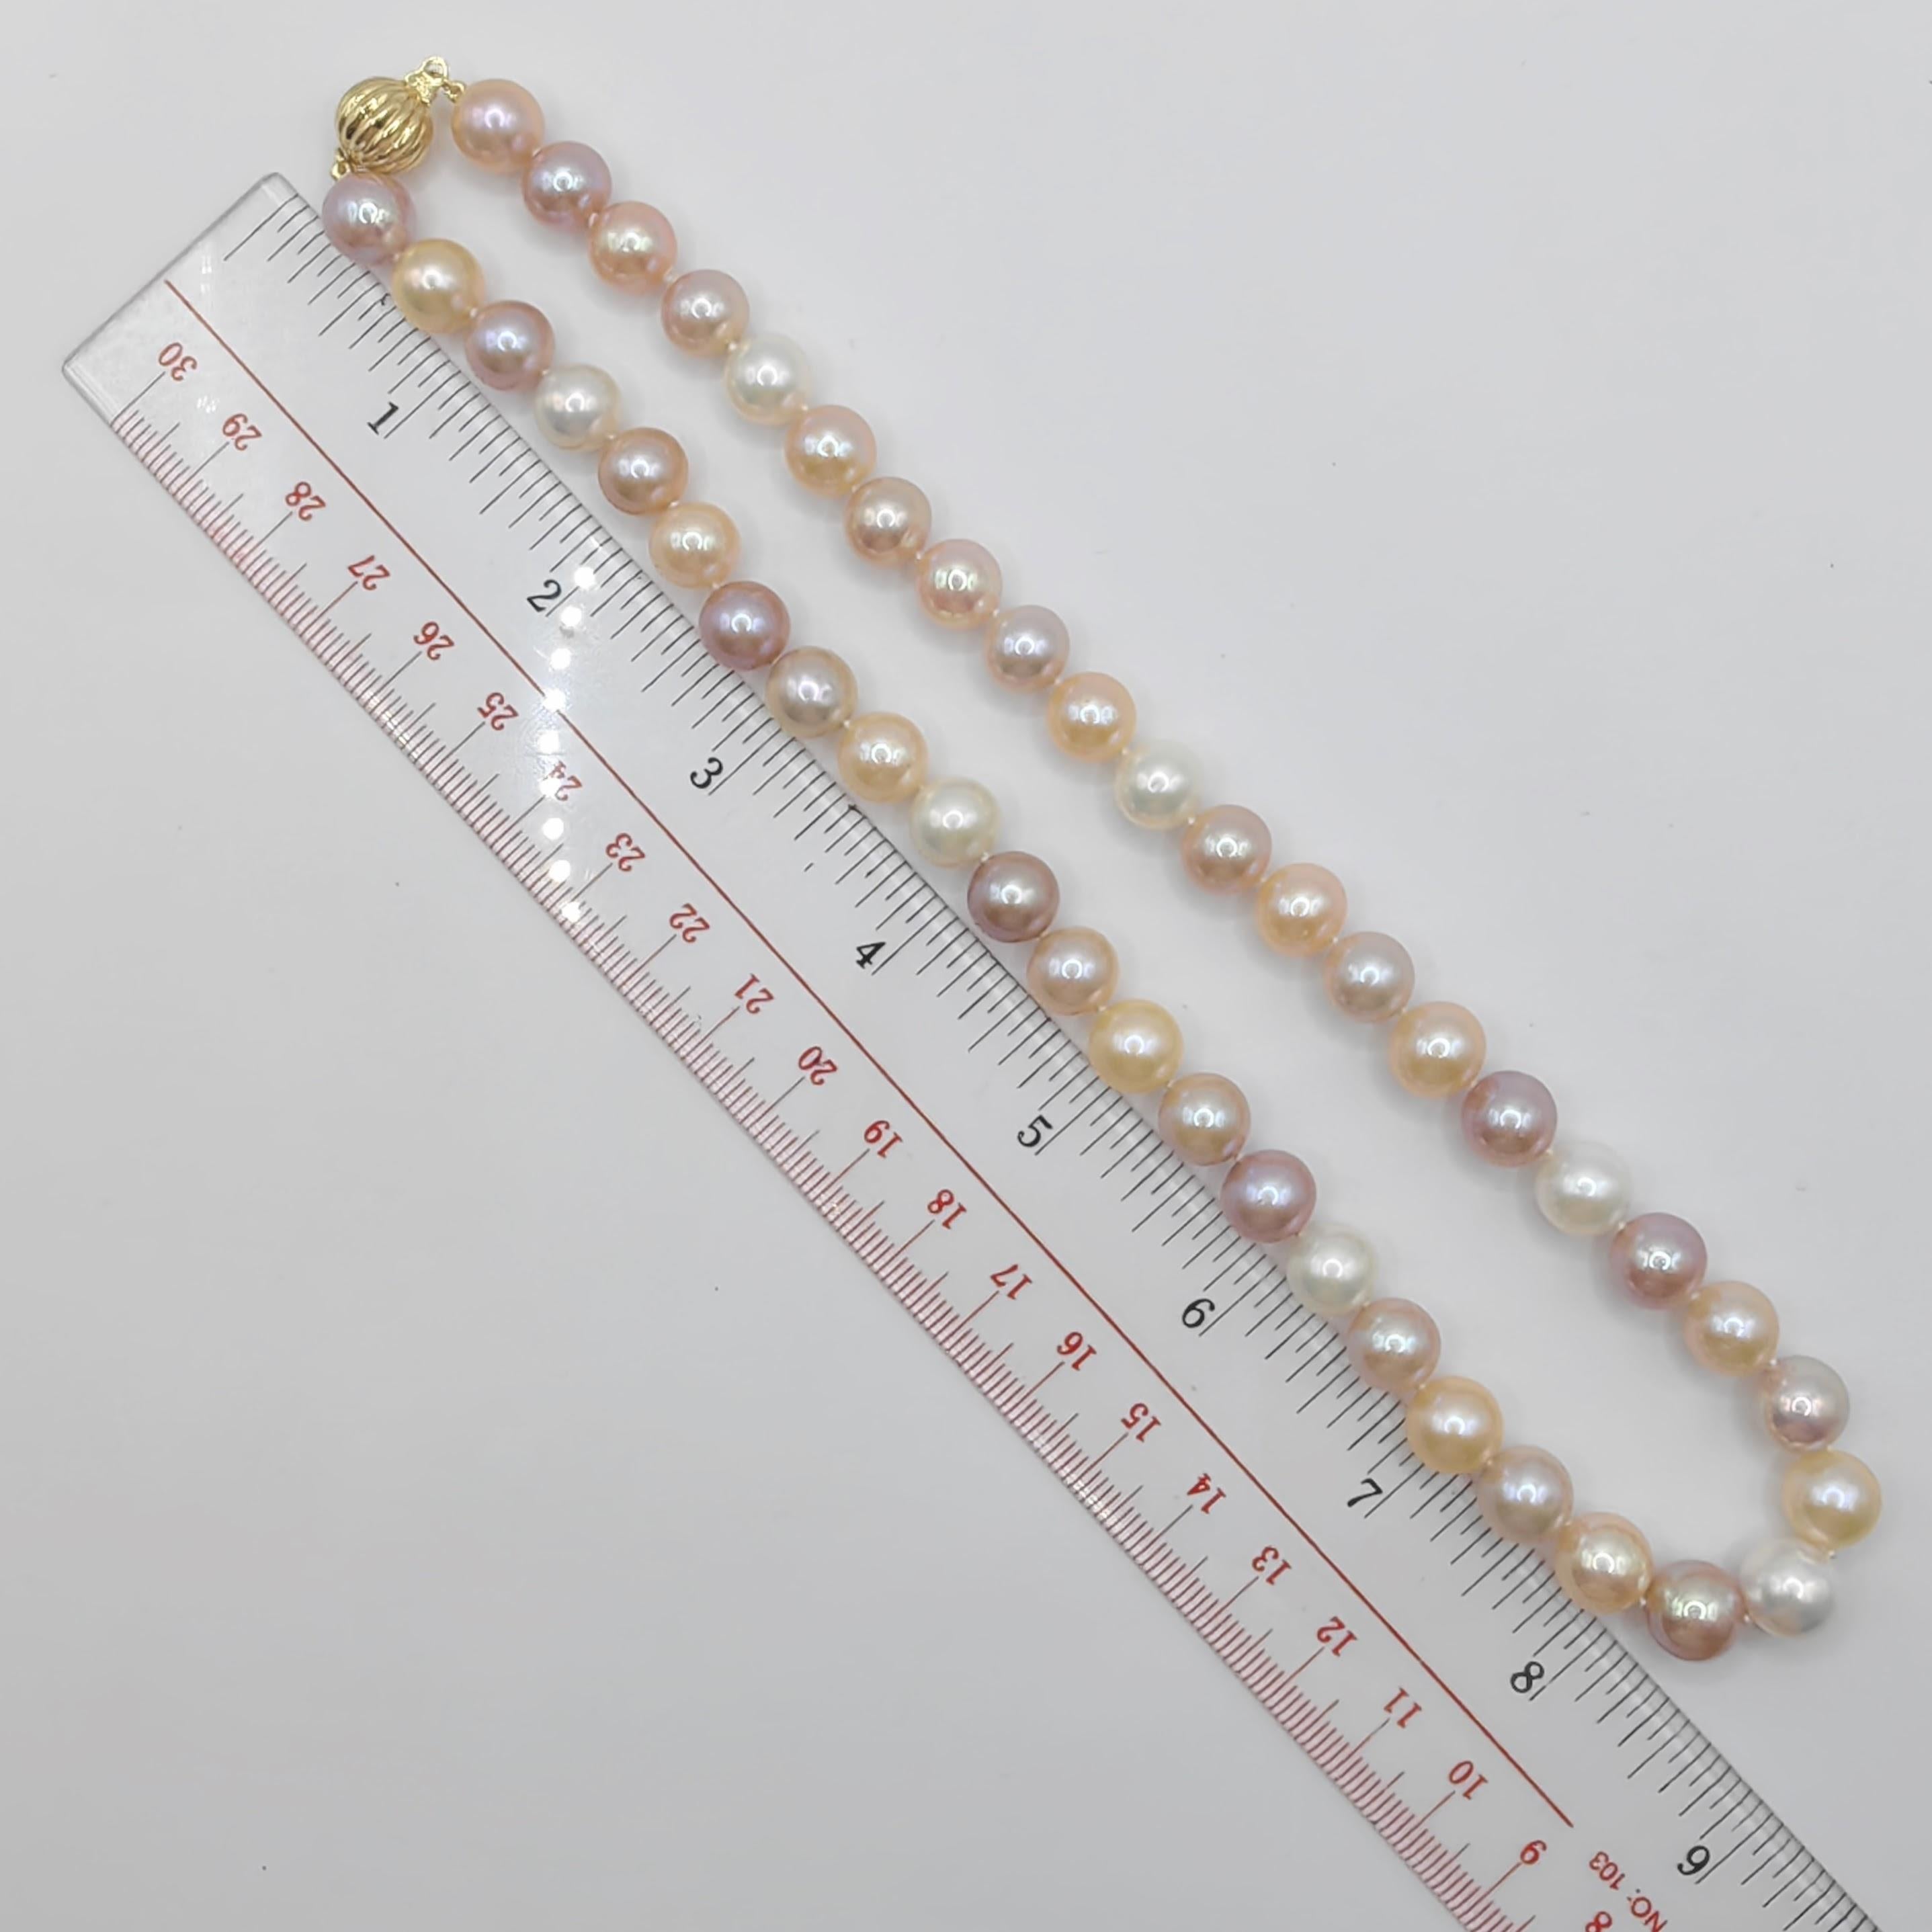 9-10mm Candy Pastel Multi-Color Round Pearl Necklace with 18K Gold Clasp For Sale 3